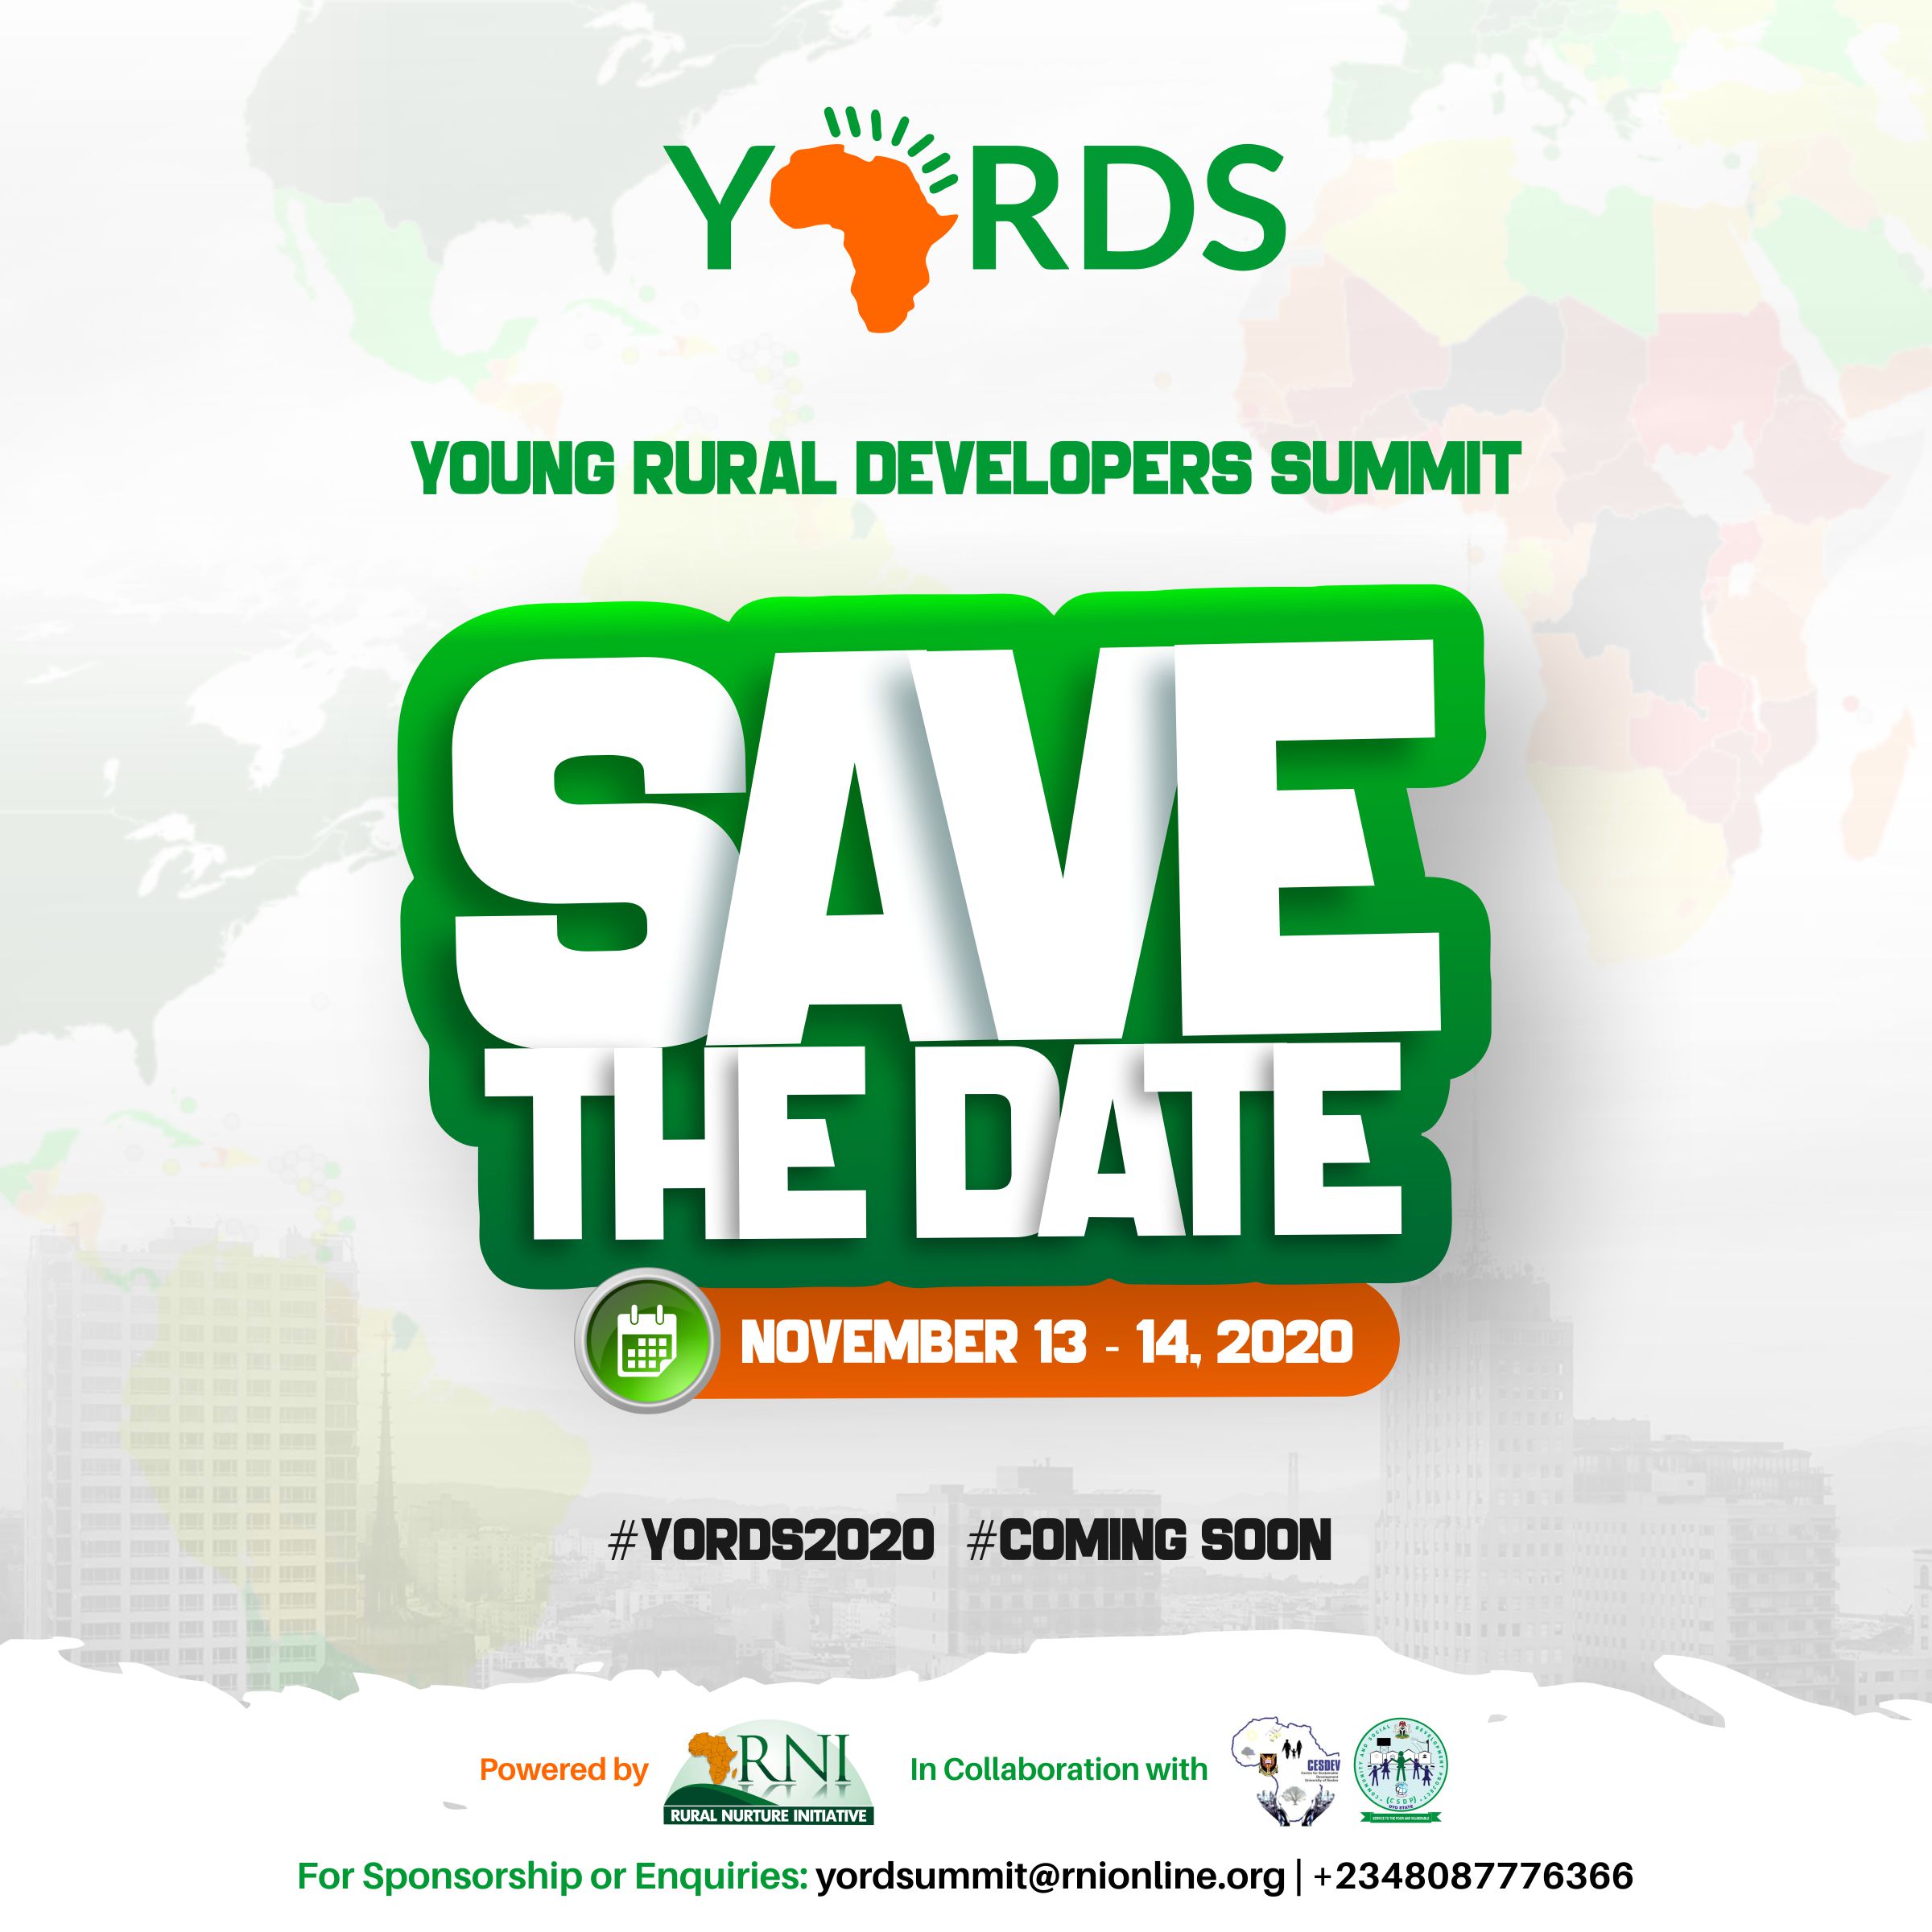 COMING SOON: Young Rural Developers Summit (YORDS 2020)